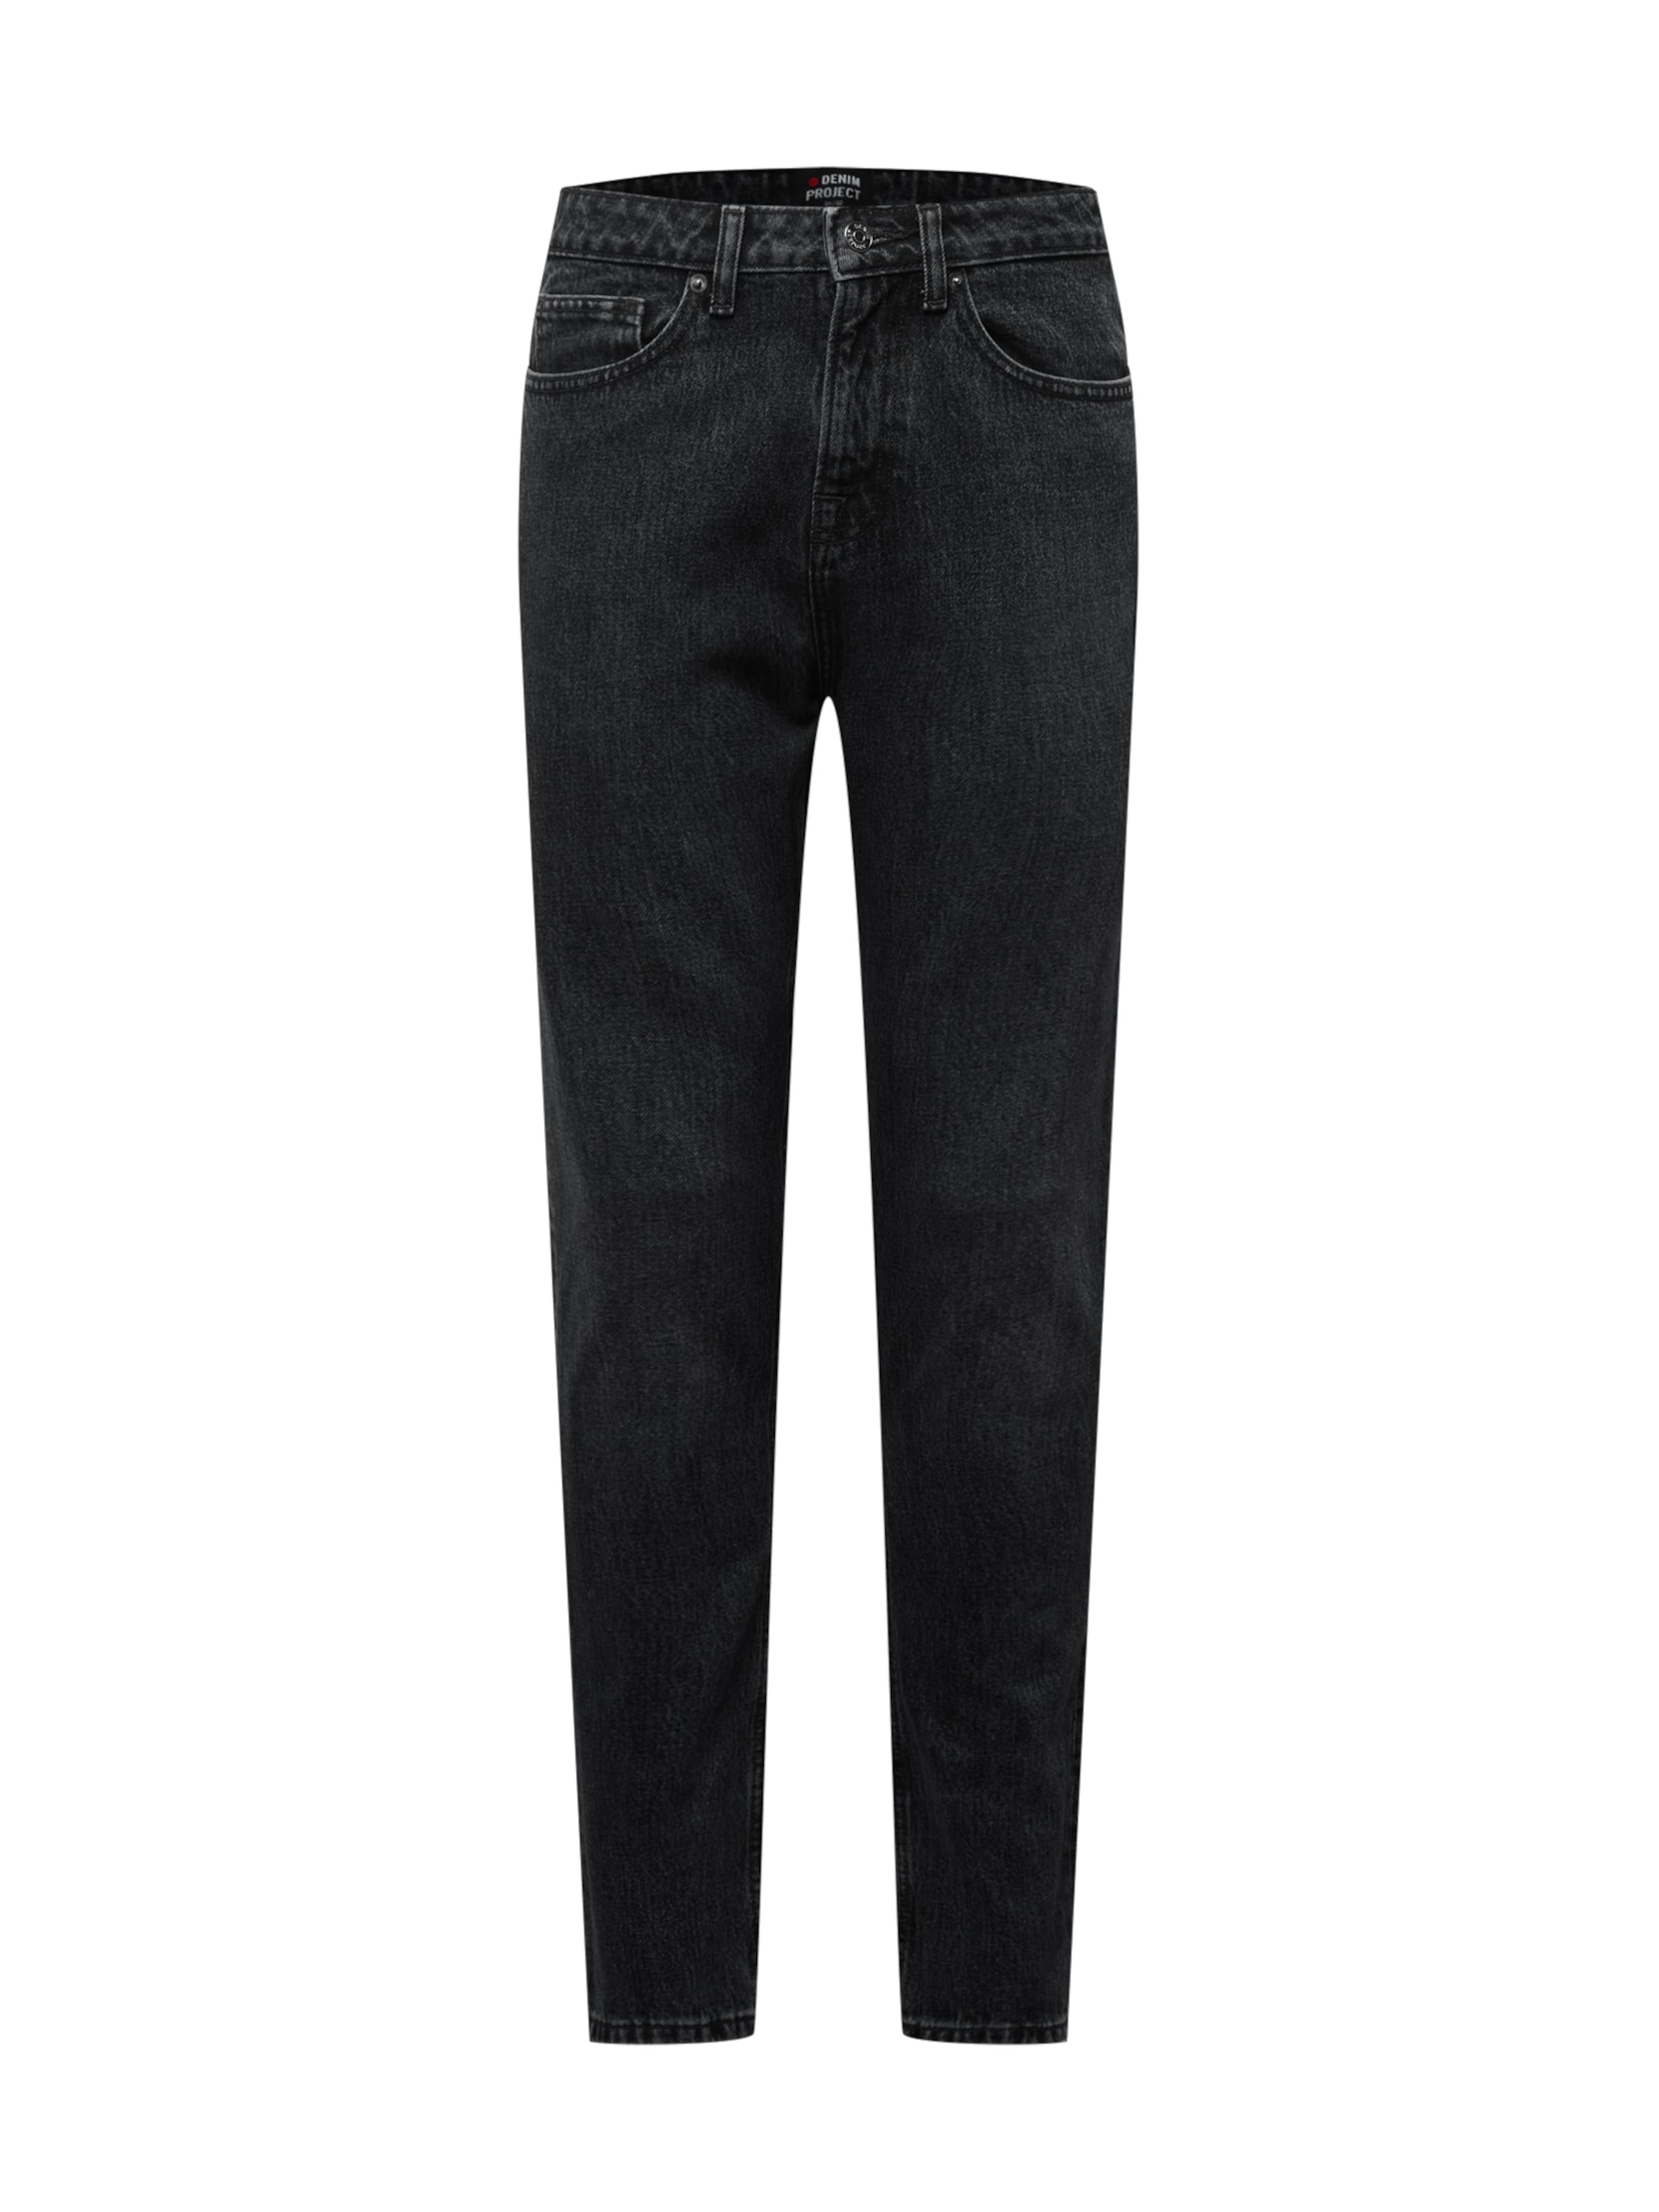 0ROE7 Jeans Denim Project Jeans Classic Dad Jeans in Nero 